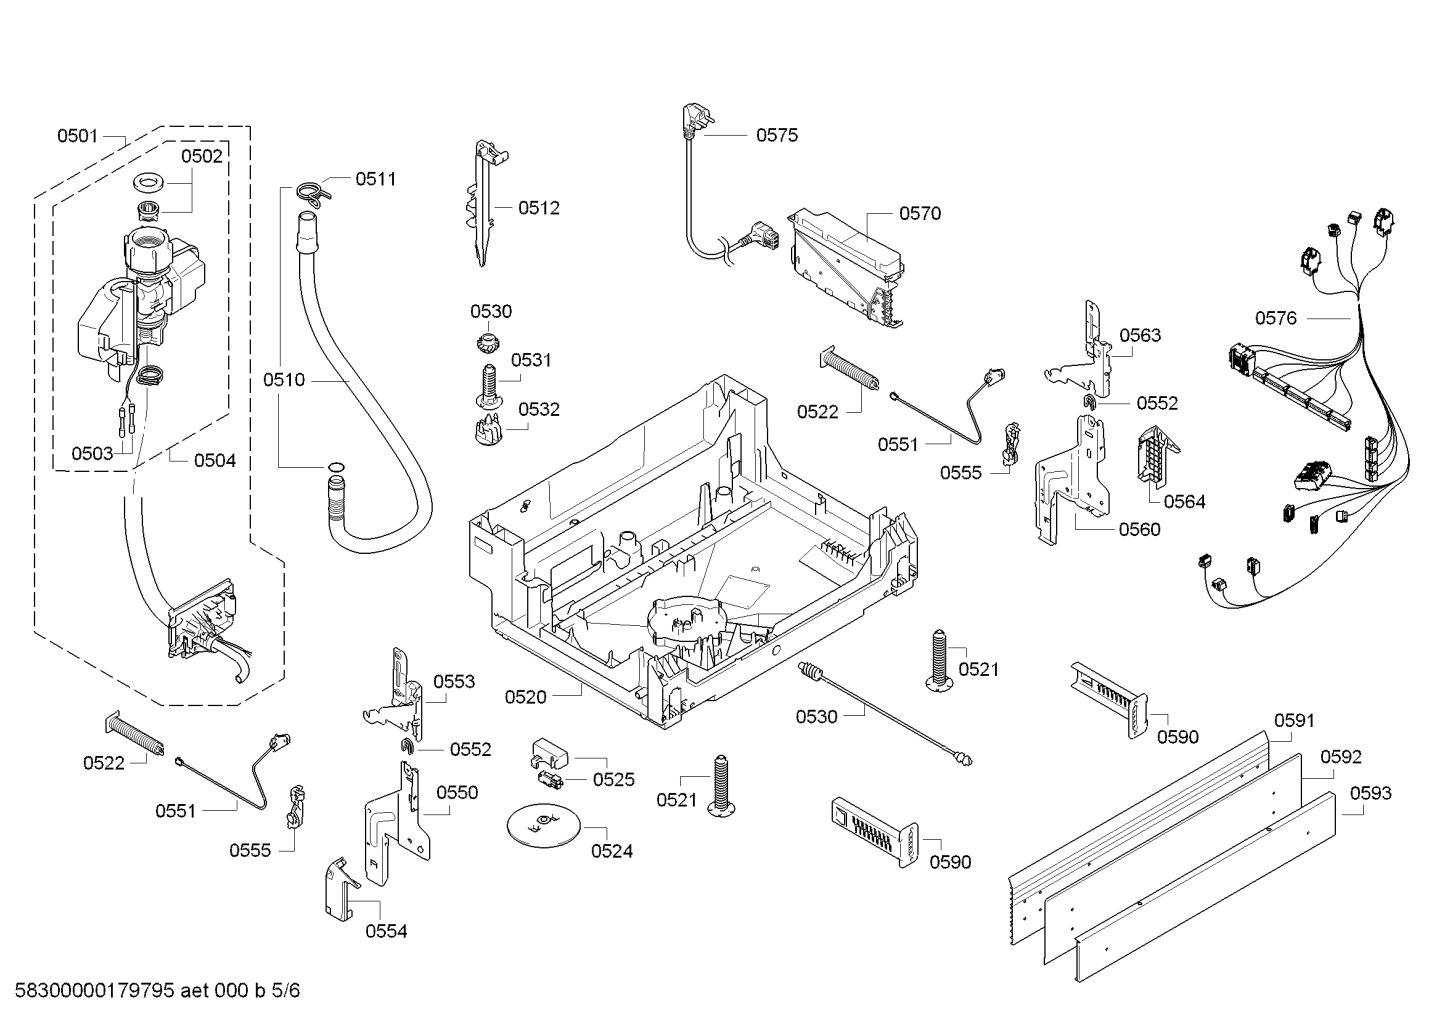 drawing_link_5_device_1667910